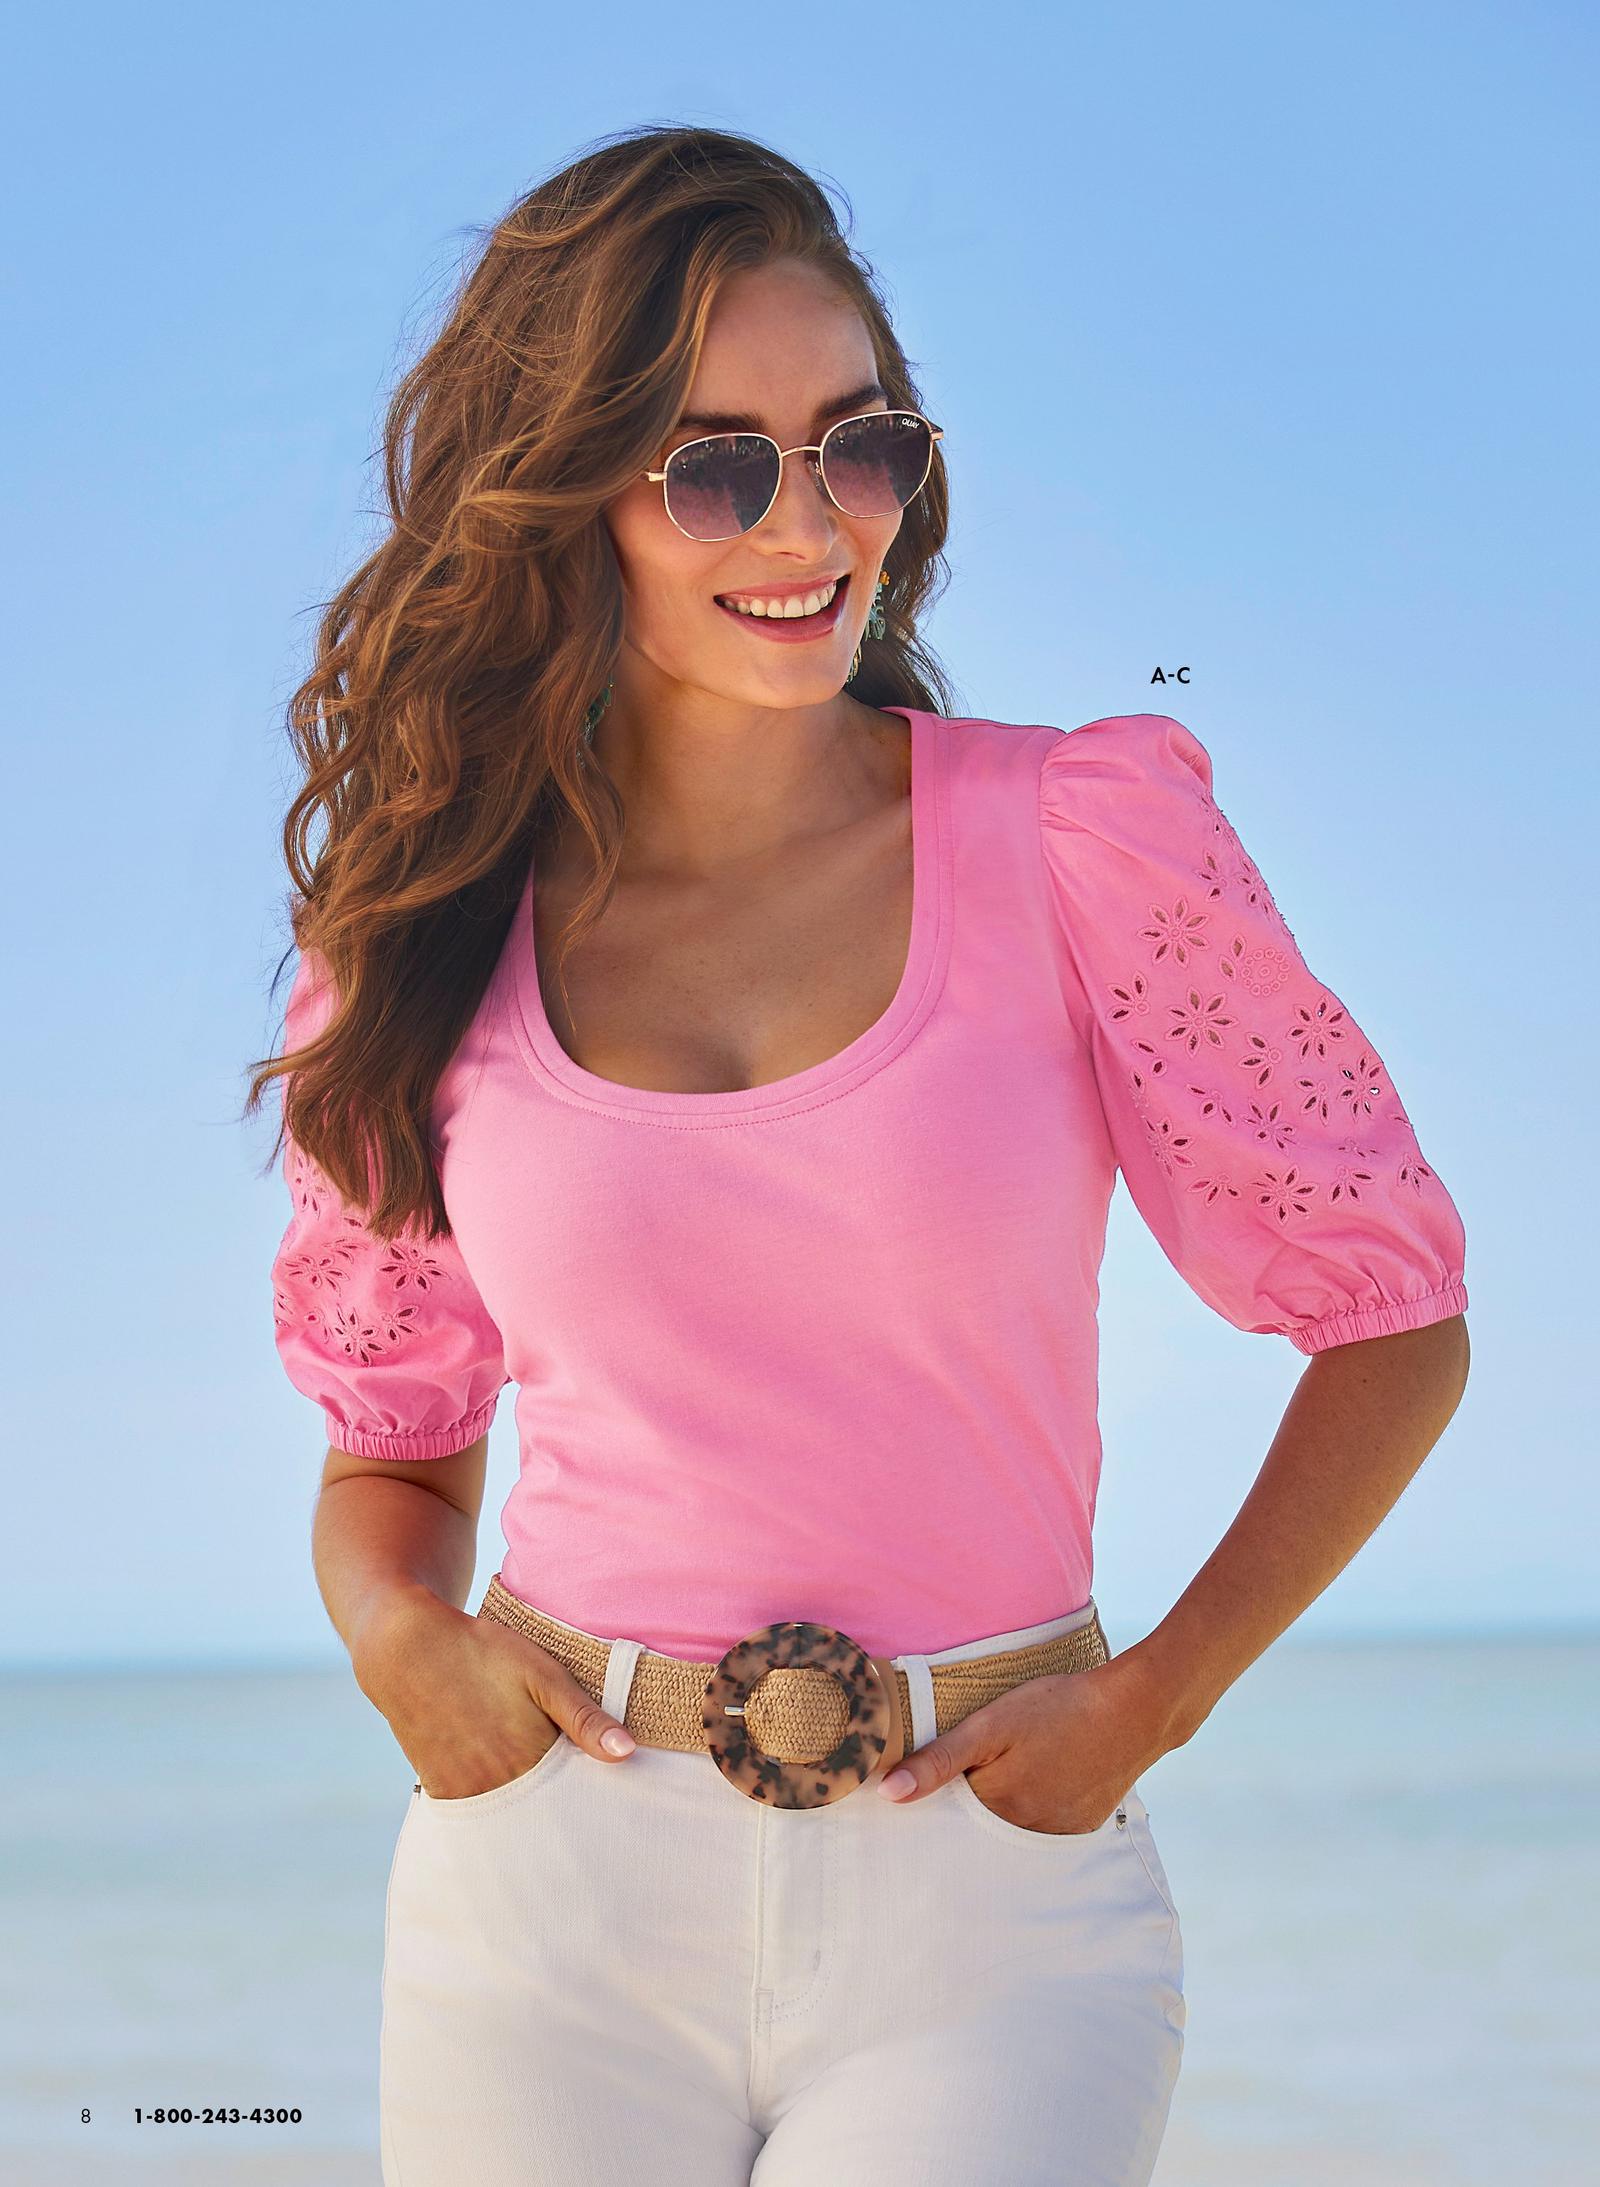 Model is wearing a Tortoiseshell Buckle Raffia Stretch Belt, Proper Stretch High-Rise Slim Ankle Jean in white and an Eyelet Puff-Sleeve Tee in bright pink.